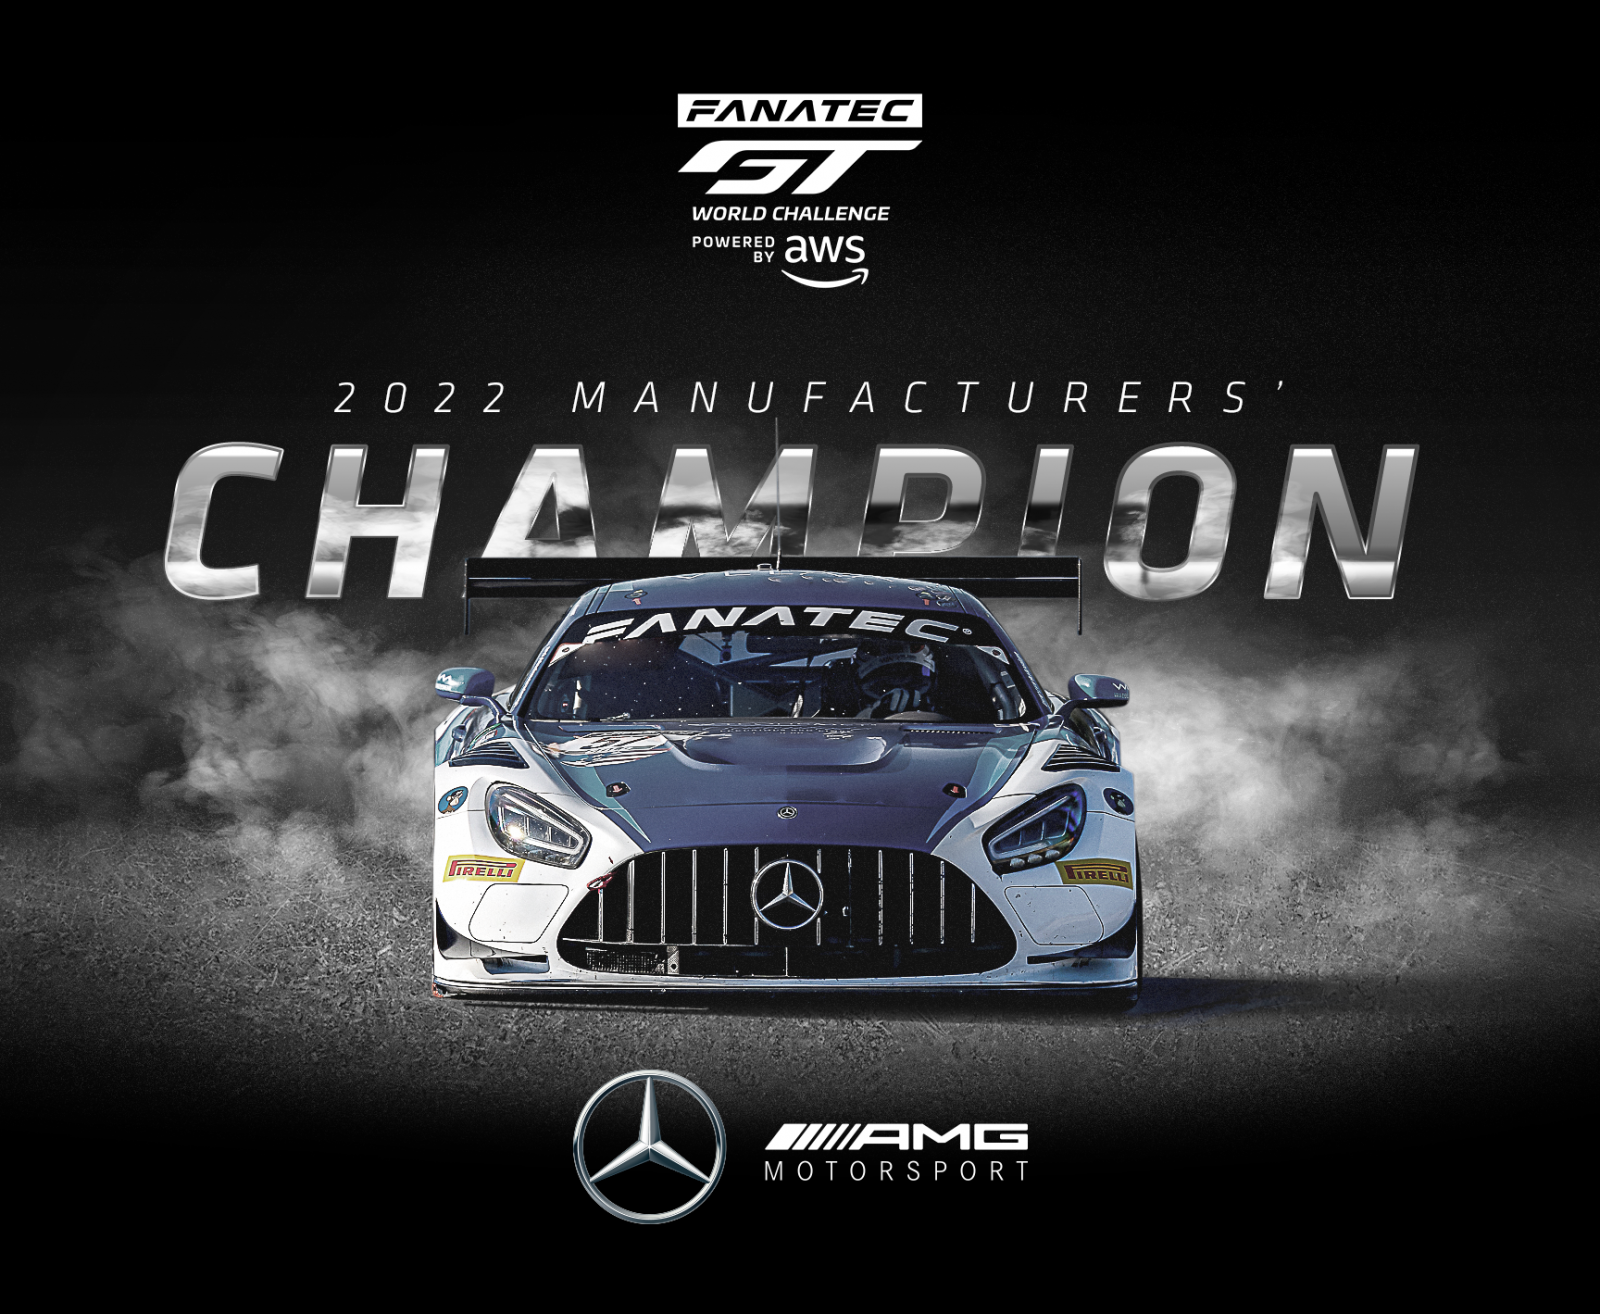 Mercedes-AMG earns fourth successive Fanatec GT World Challenge Powered by AWS crown